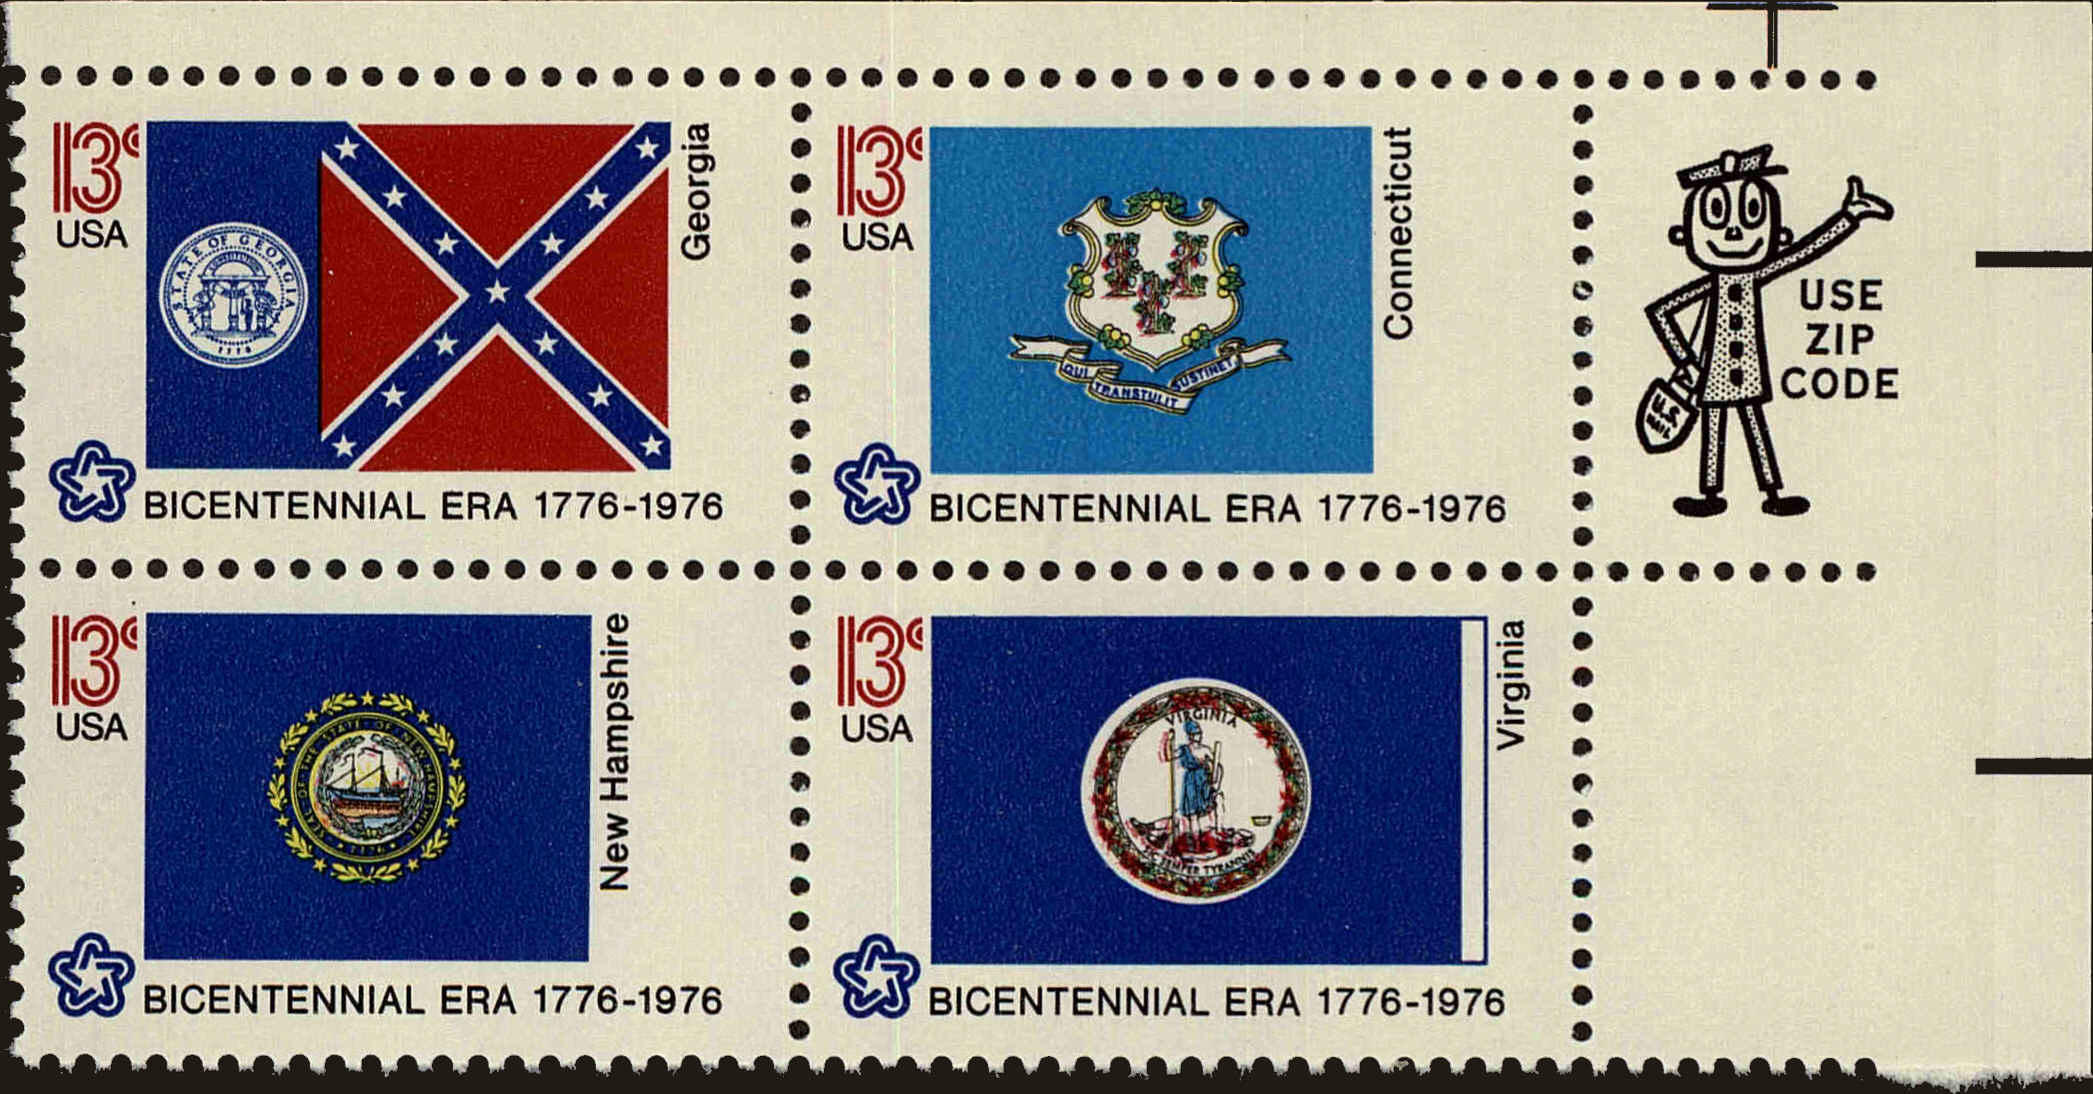 Front view of United States 1685 collectors stamp